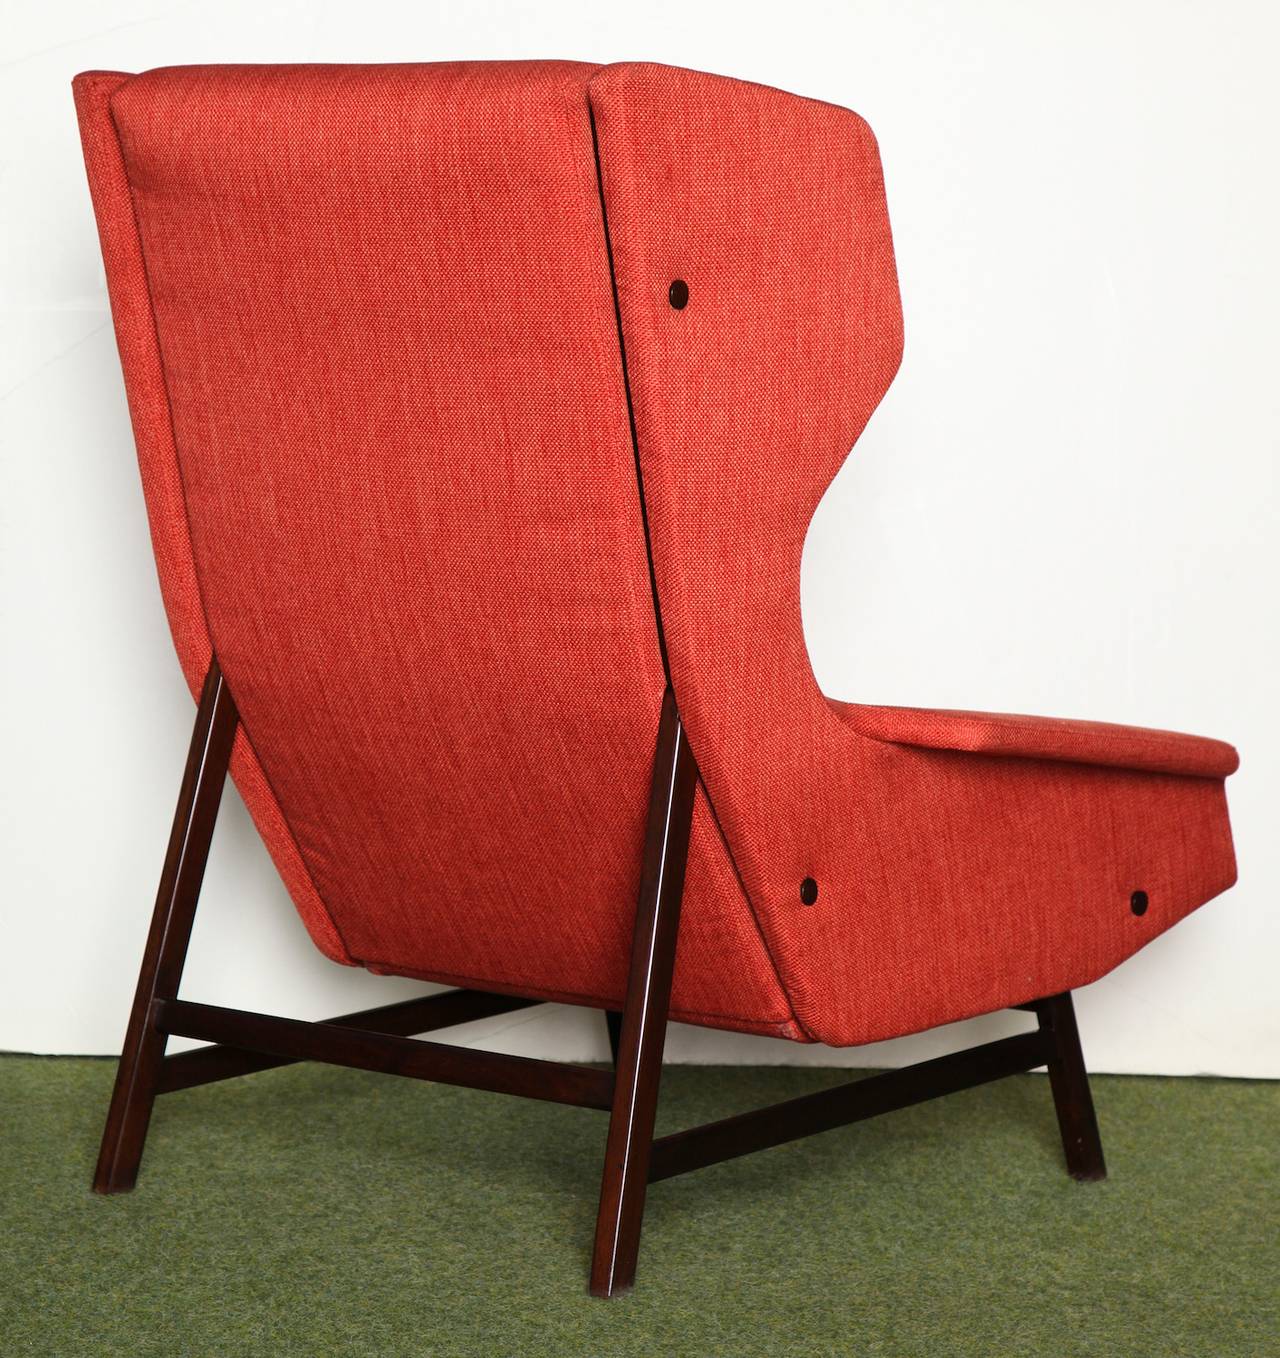 Great architectural lounge chair in dark wood base. Modernist wingback form with great details. The last image is a period ad from Rivista dell'Arredamento, Nov. 1961.